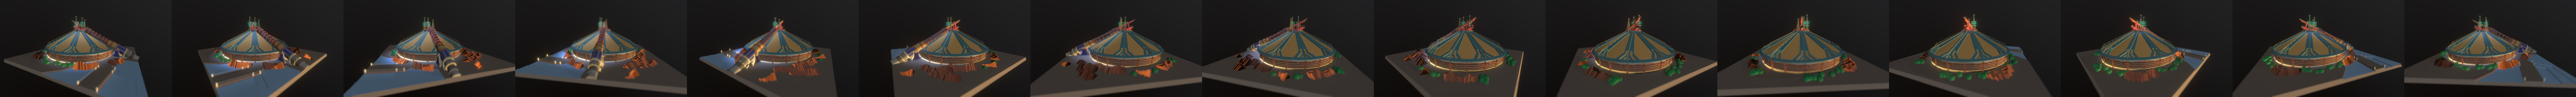 space mountain 3d model printed